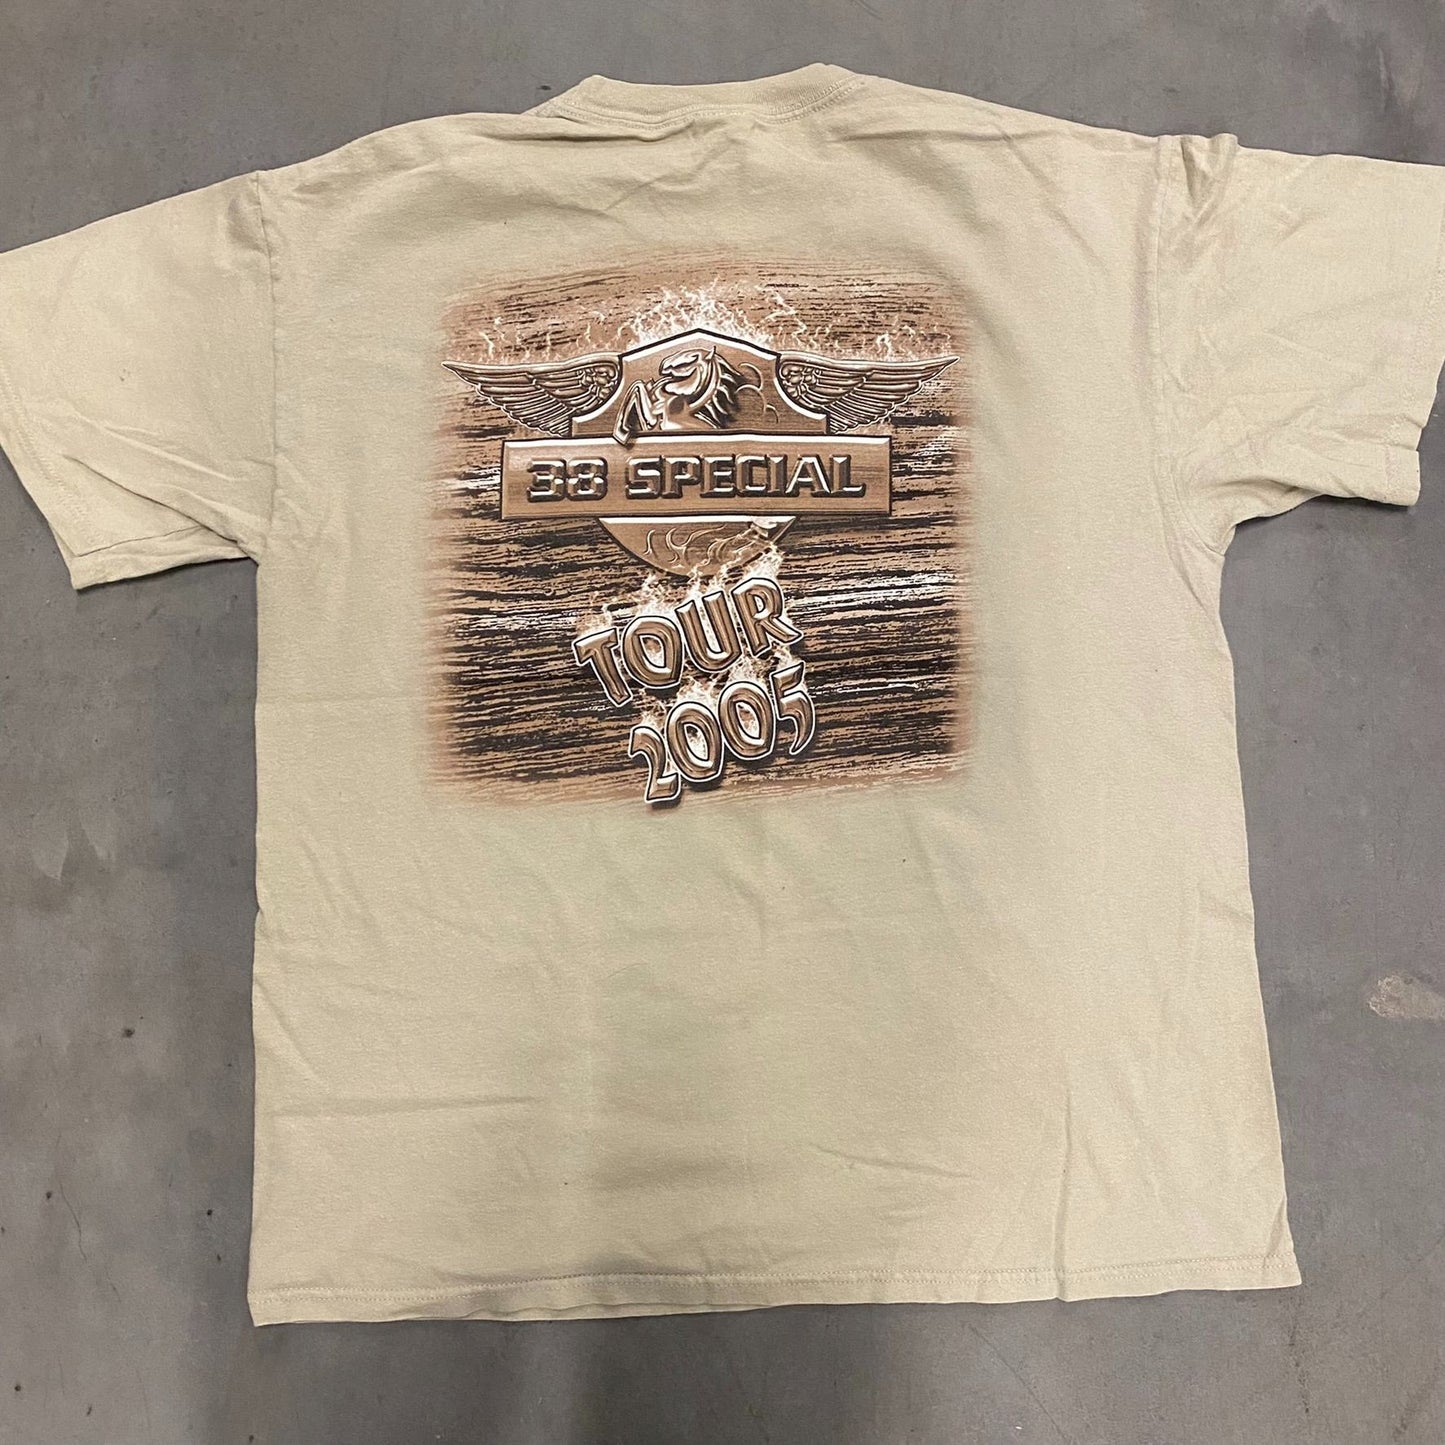 38 Special Vintage Band T-Shirt